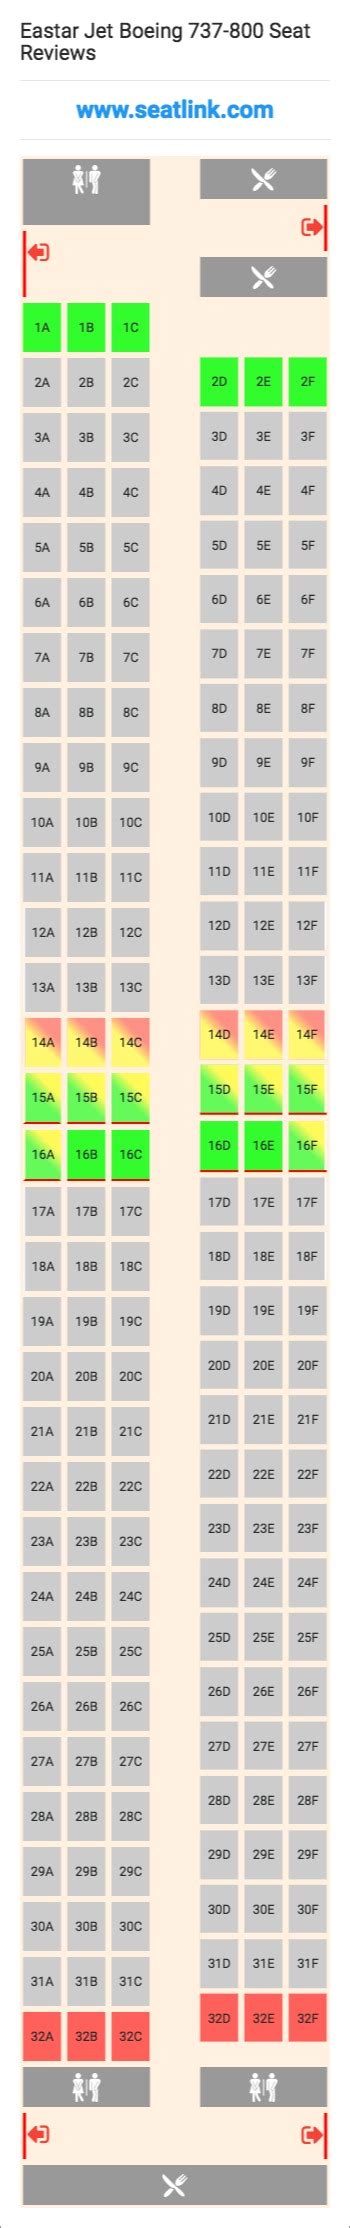 Jet Airways Boeing 737 800 Winglets Seating Plan Awesome Home